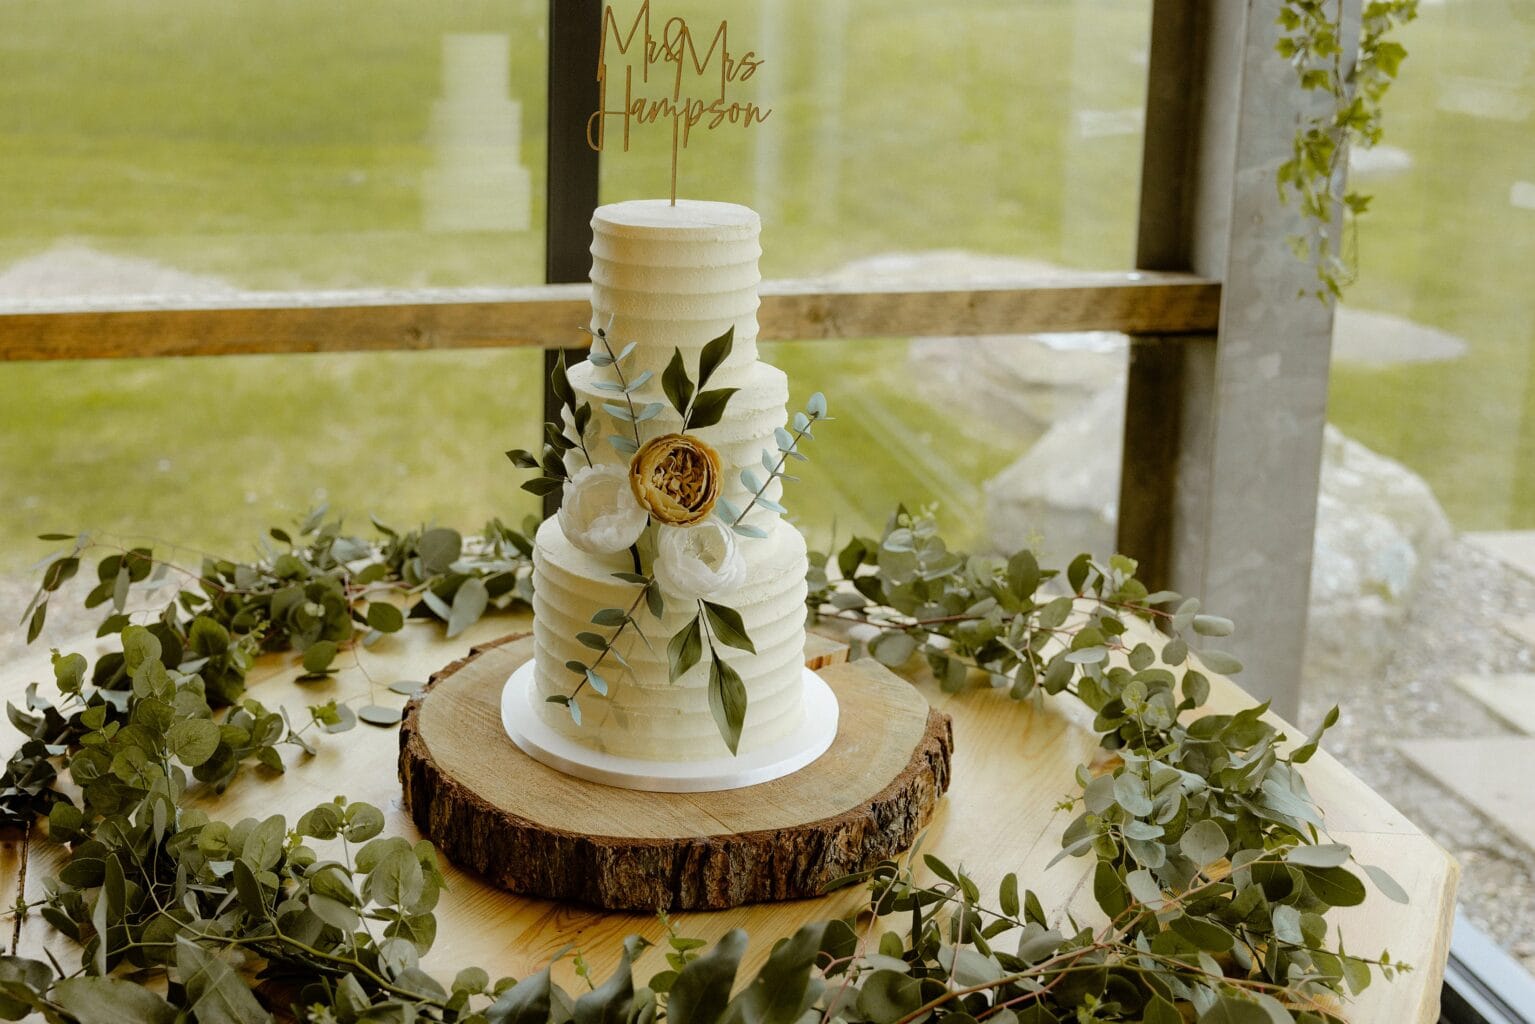 a white three tier wedding cake decorated with flowers sits on a wooden base within a greenery wreath in front of a large window